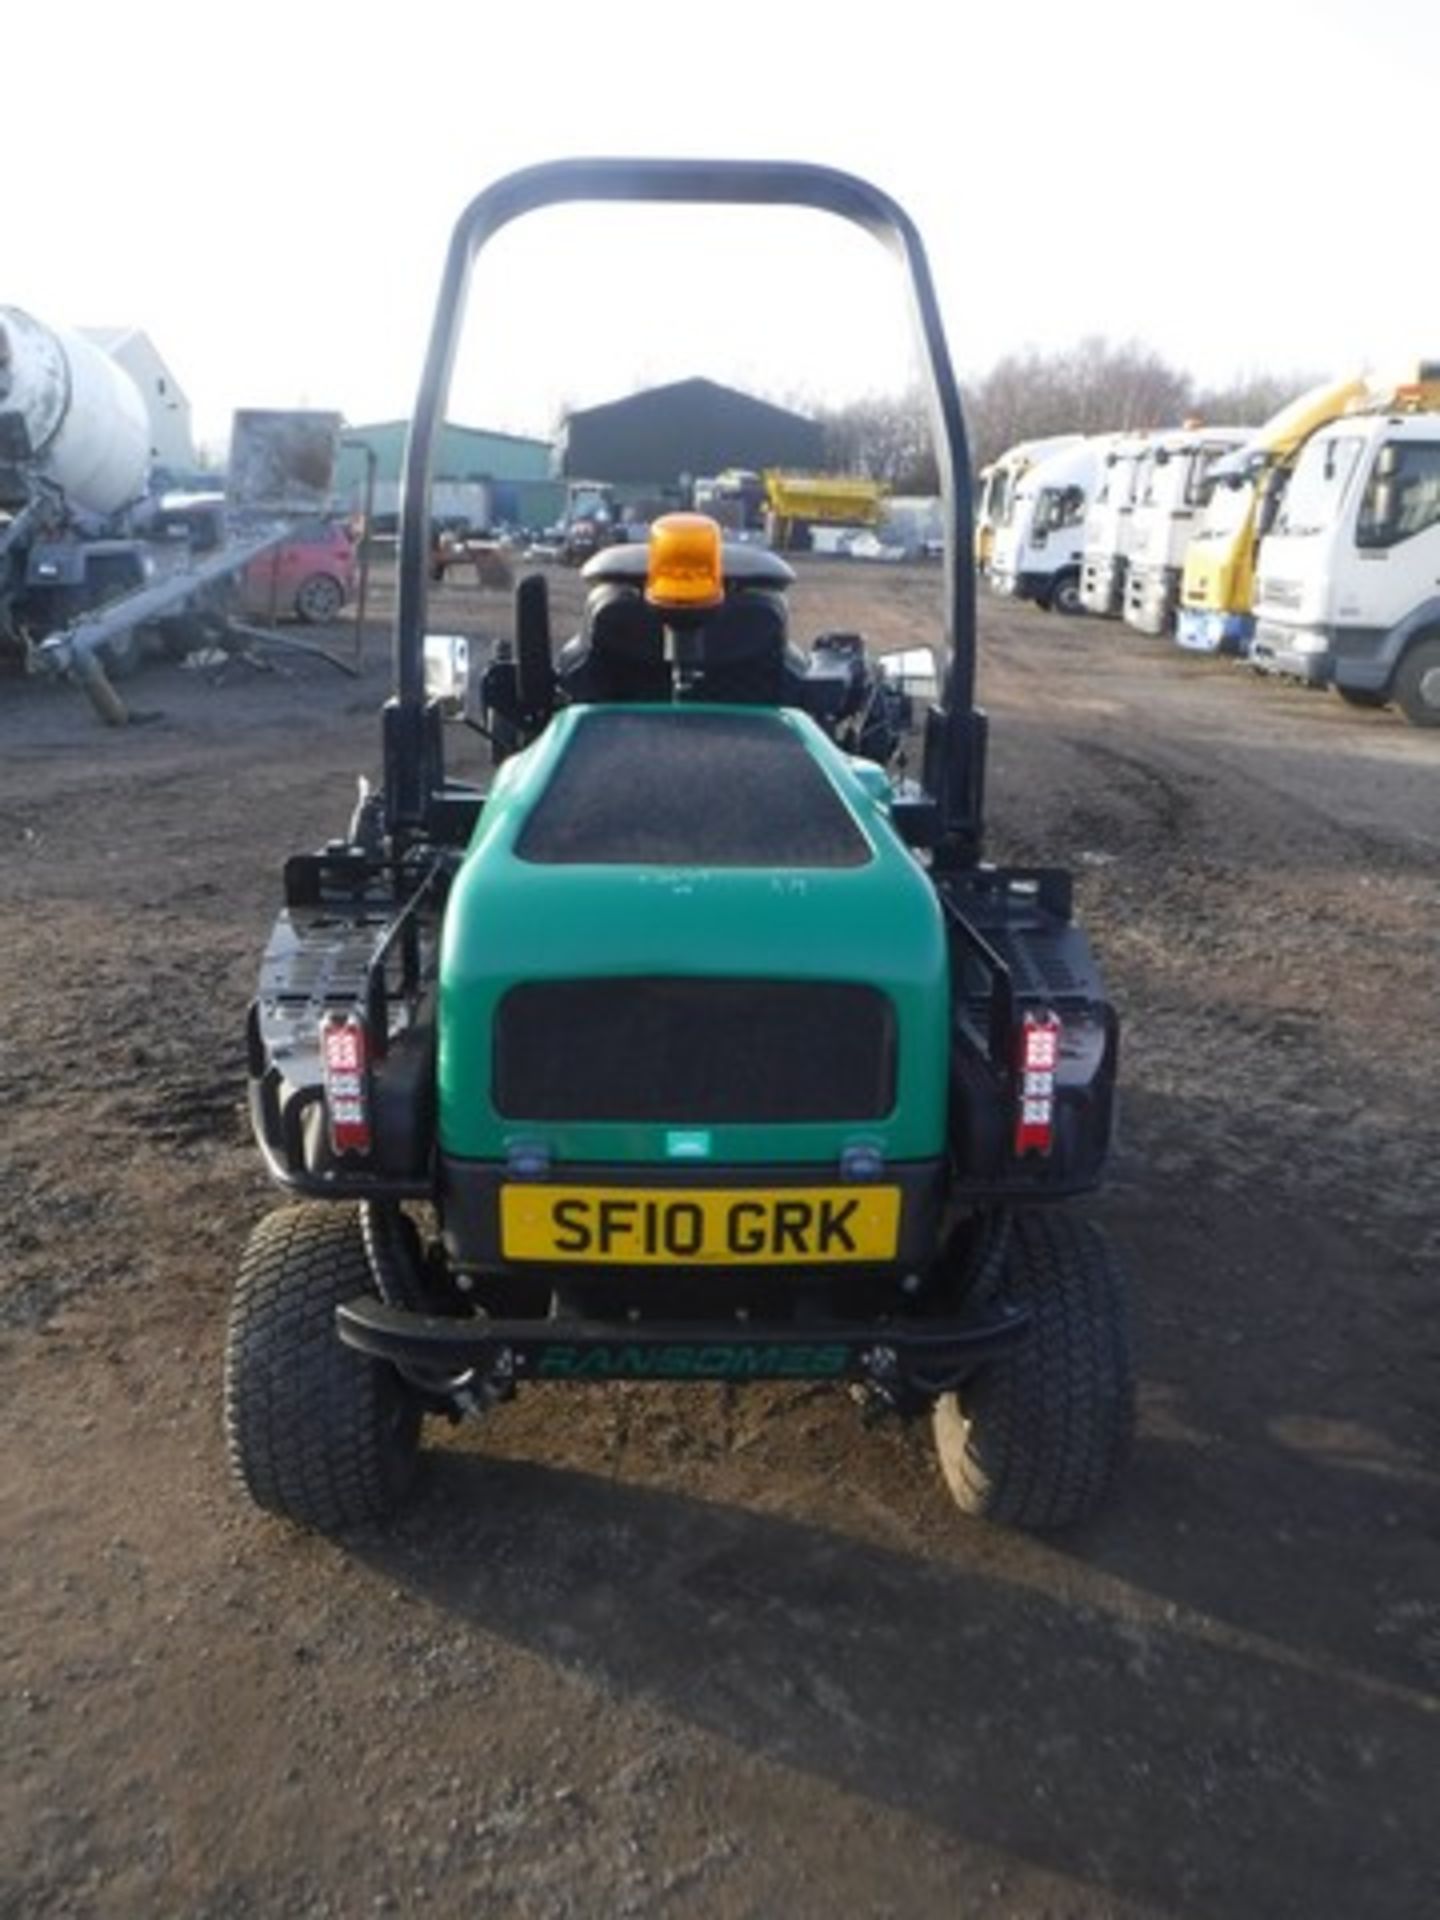 2010 RANSOMES HR 3300T diesel rotary ride on mower. REG NO SF10 GRK. FL NO CP3689. 3543 HRS - Image 4 of 6